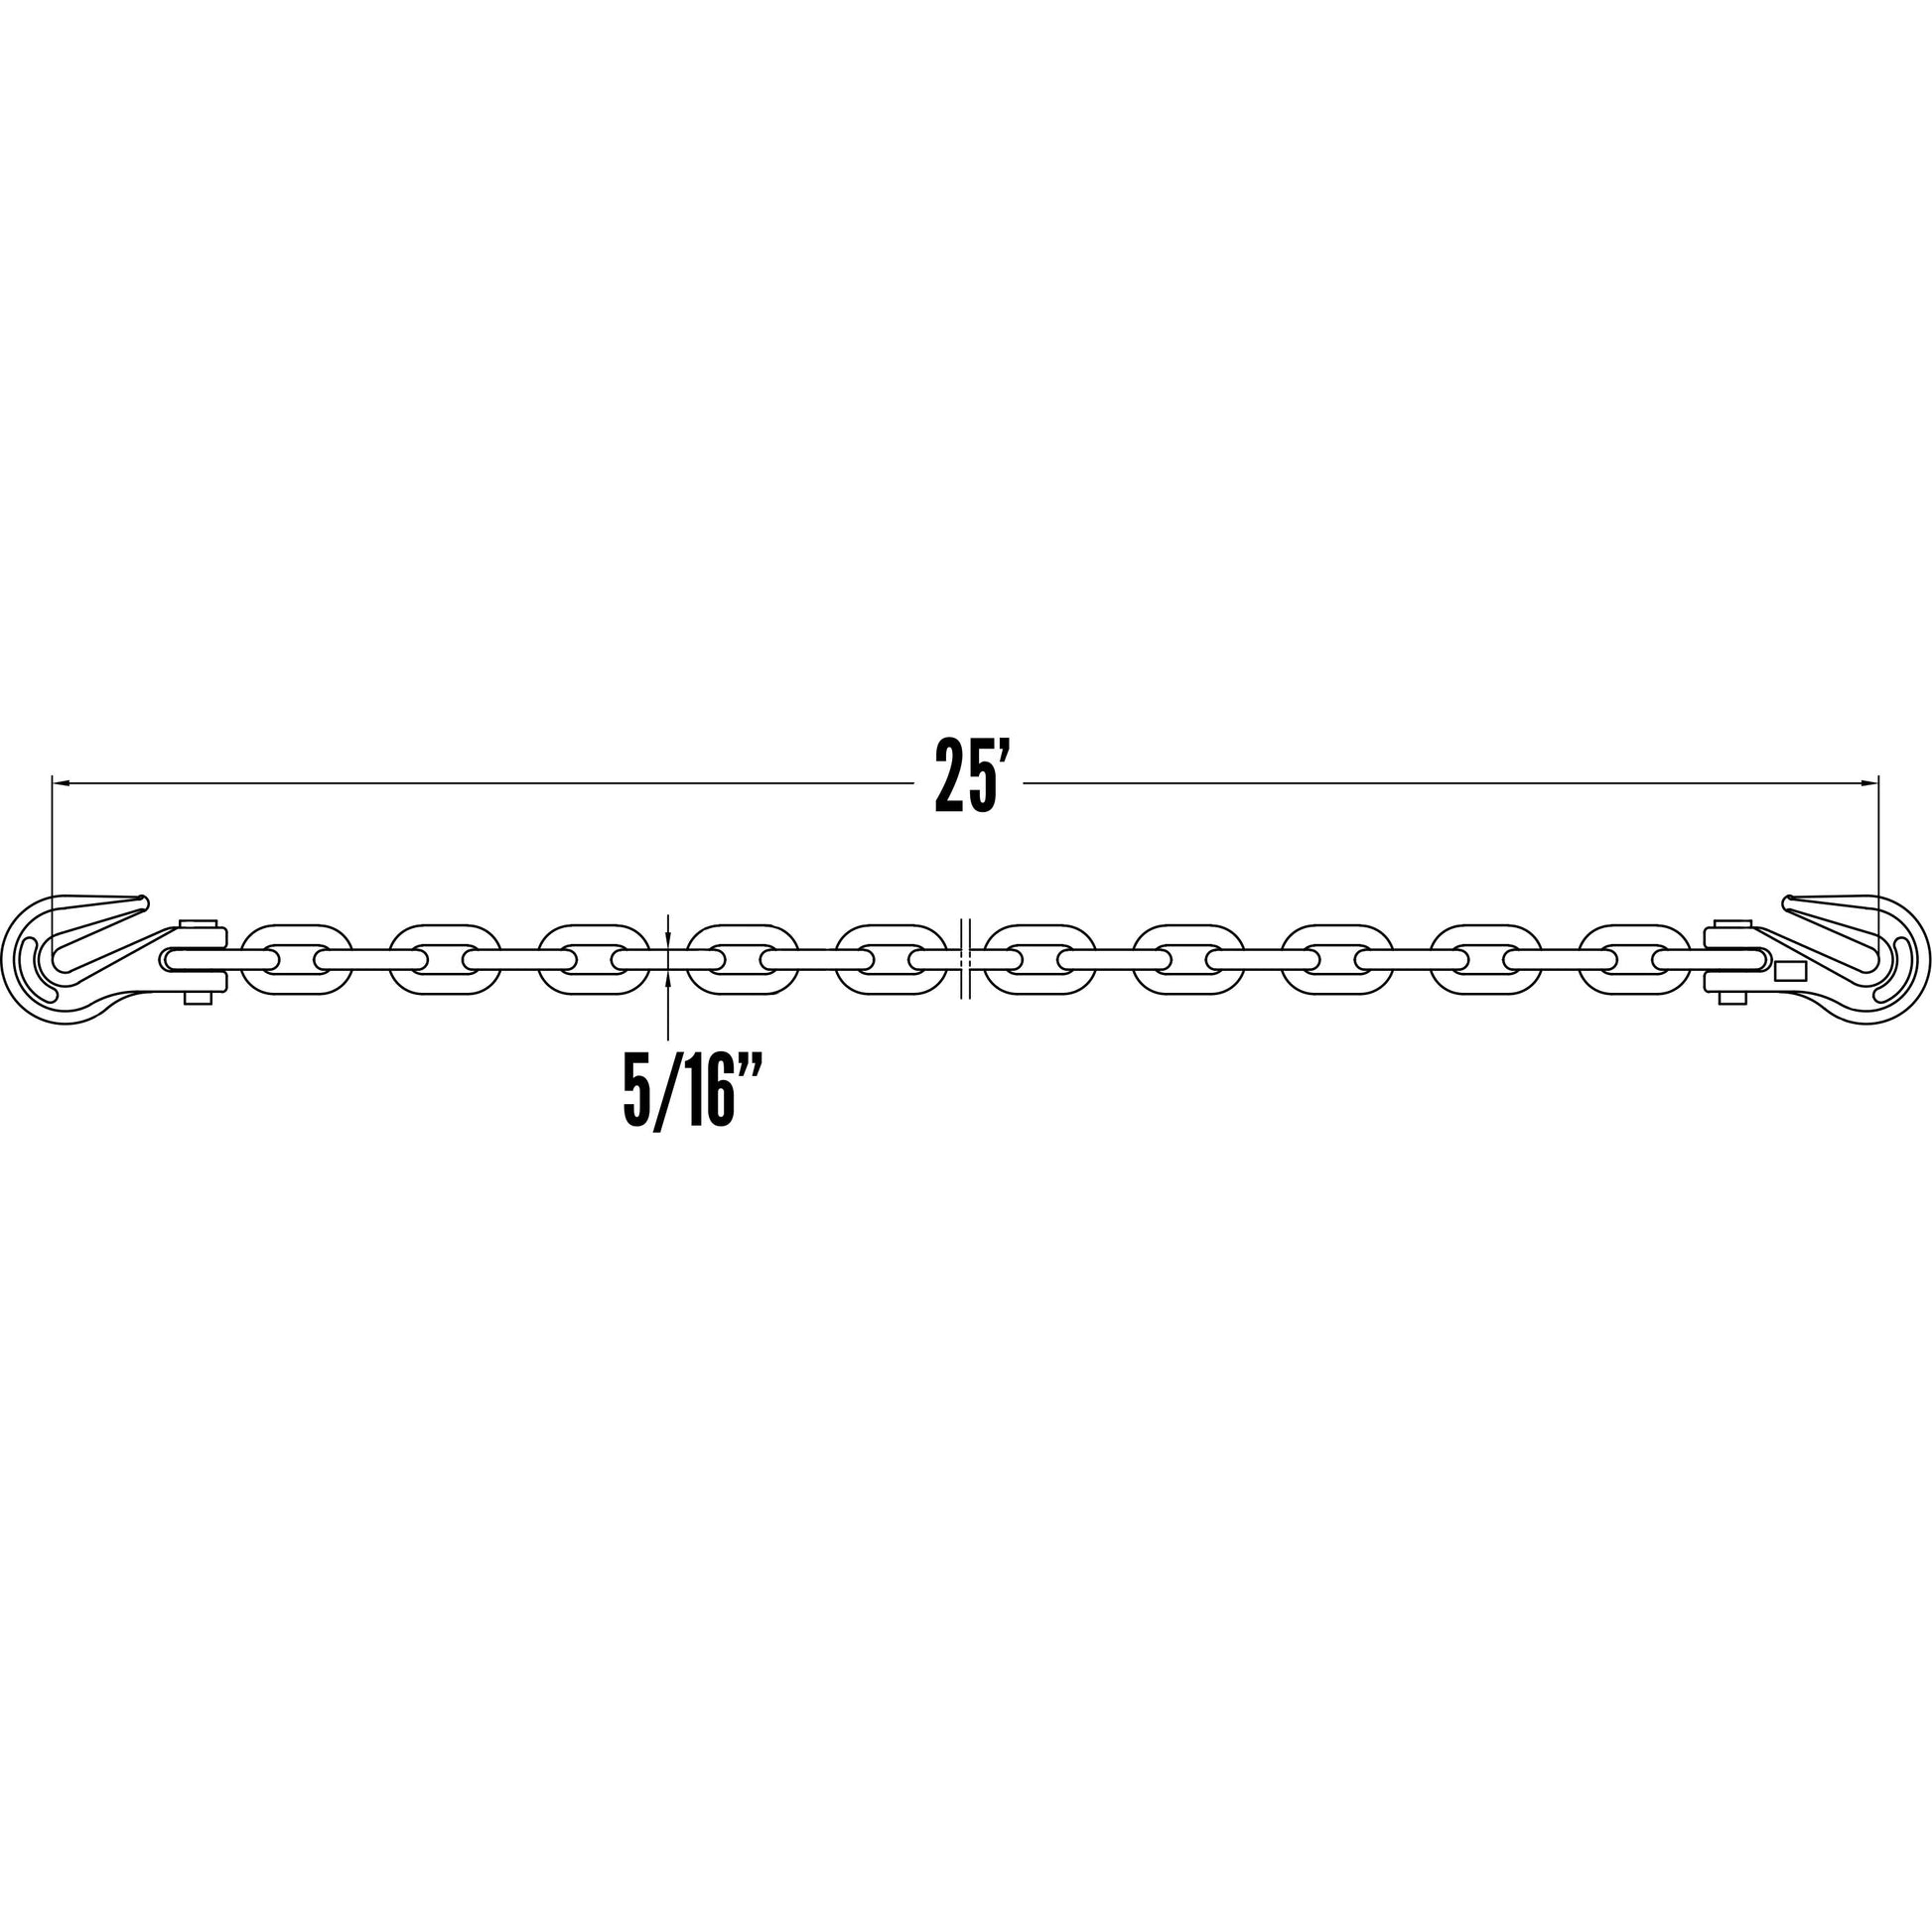 Grade 70 516 inch x 25 foot Chain Ratchet Chain Binder Made in USA Package image 6 of 9